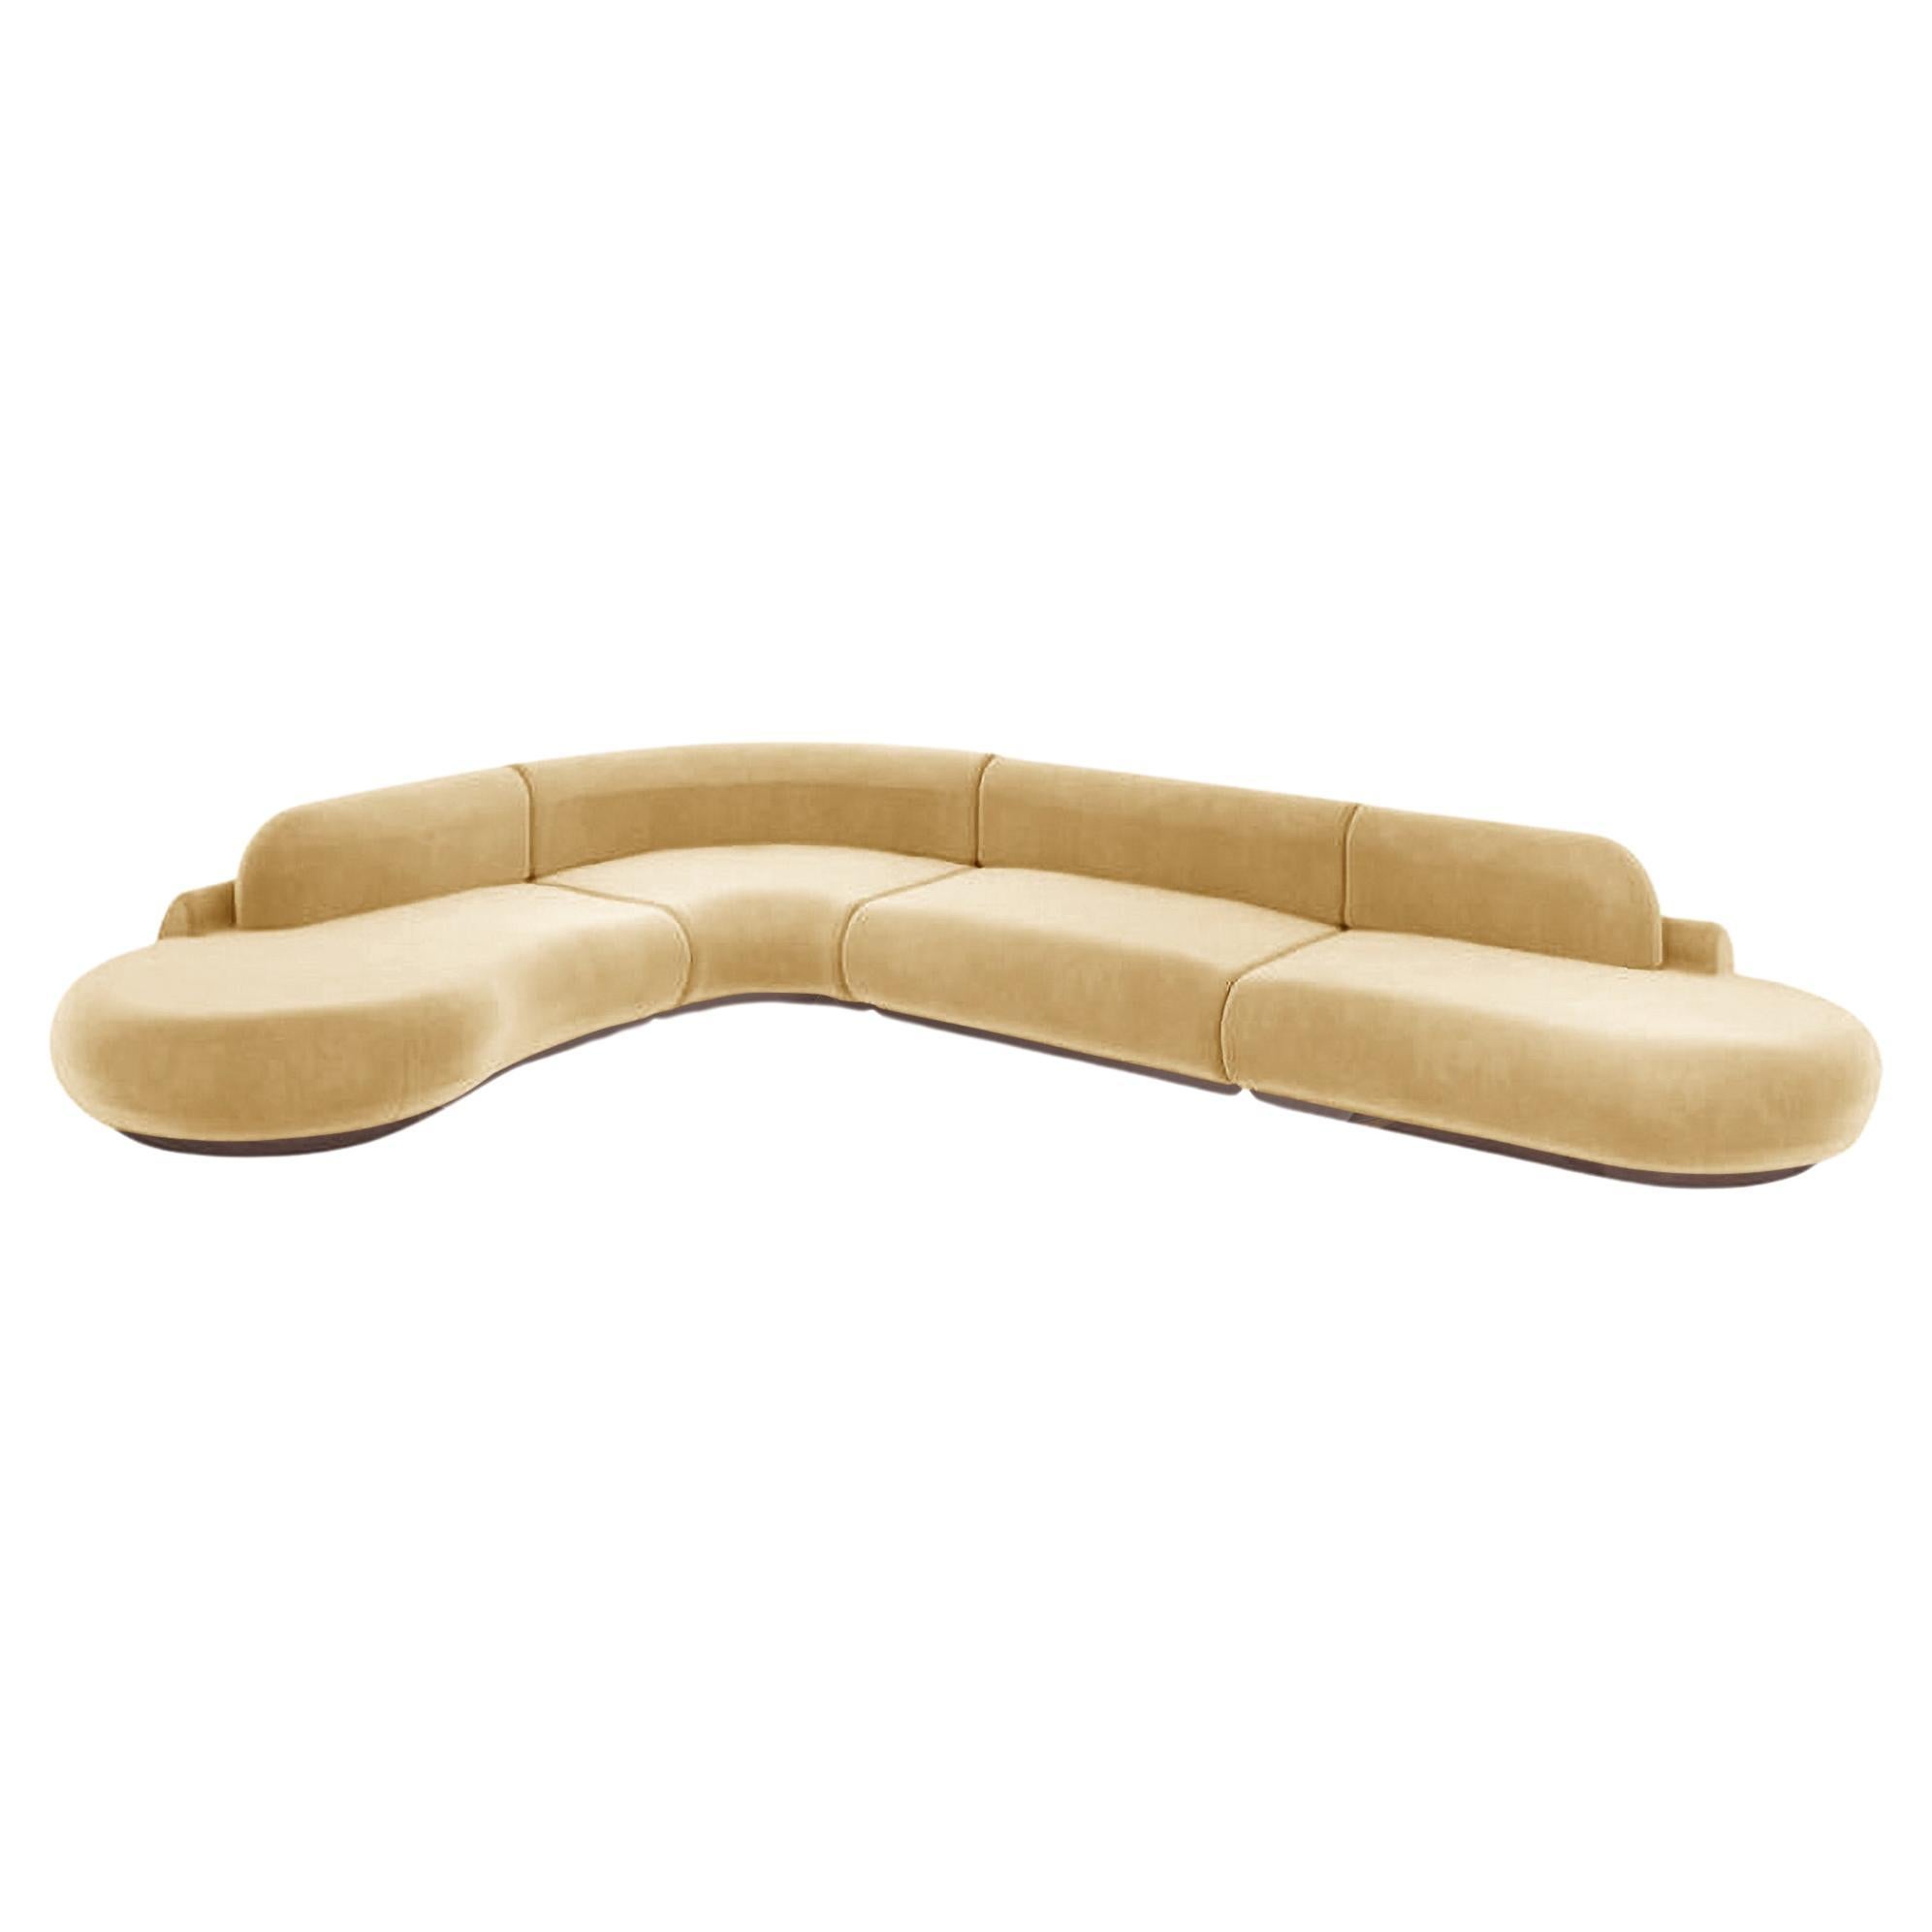 Naked Curved Sectional Sofa, 4 Piece with Beech Ash-056-1 and Vigo Plantain